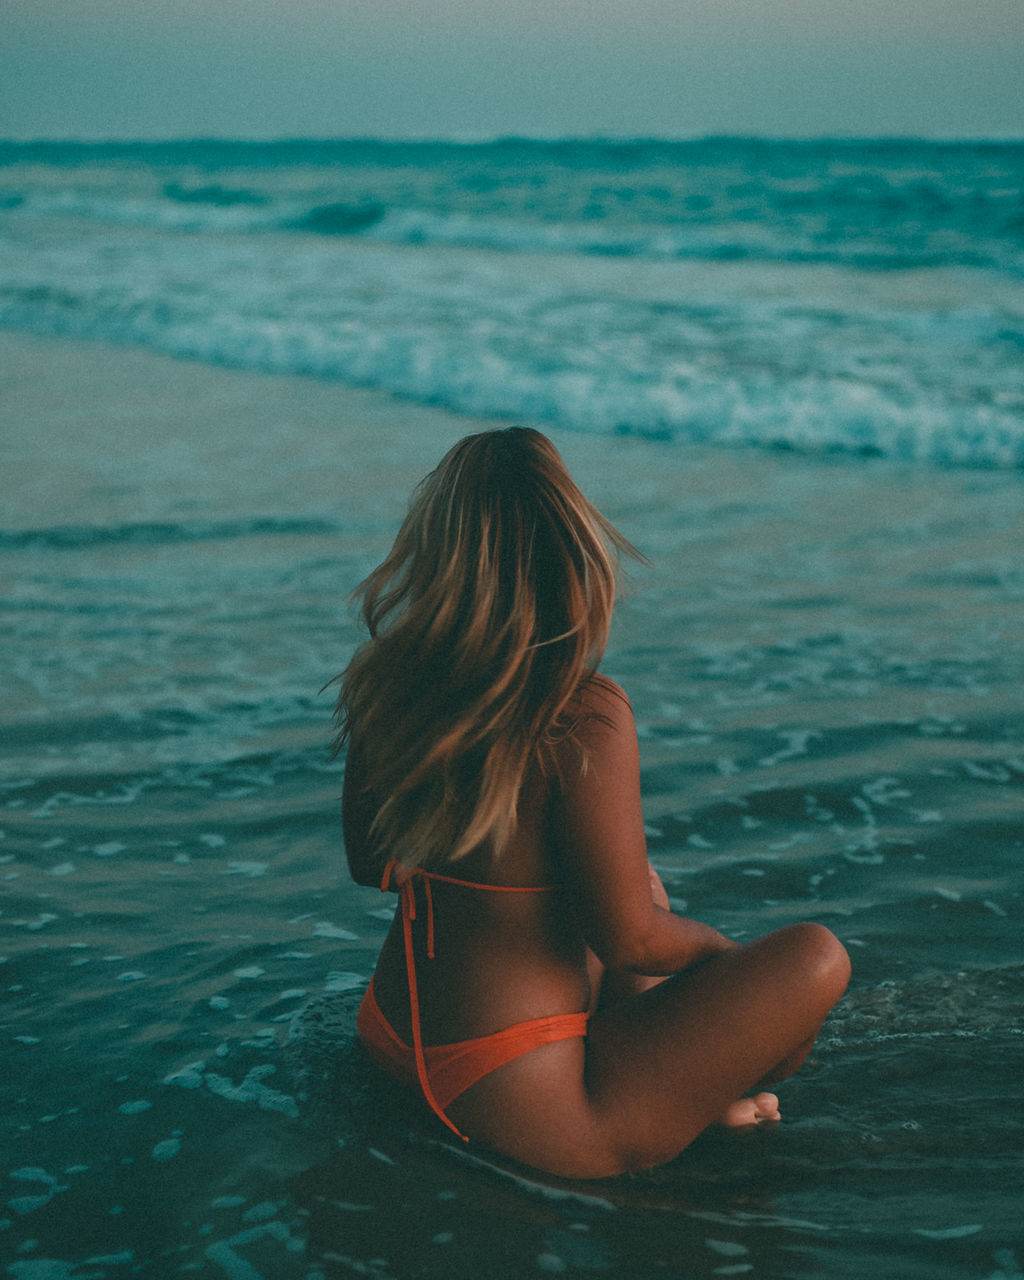 water, sea, one person, ocean, women, wave, clothing, land, rear view, nature, long hair, adult, hairstyle, holiday, relaxation, vacation, trip, swimming, beauty in nature, leisure activity, beach, swimwear, lifestyles, young adult, bikini, horizon, horizon over water, summer, sky, tranquility, shore, blond hair, sunlight, sitting, female, wind wave, outdoors, blue, tranquil scene, solitude, day, person, idyllic, motion, scenics - nature, child, back, body of water, sports, childhood, coast, three quarter length, fashion